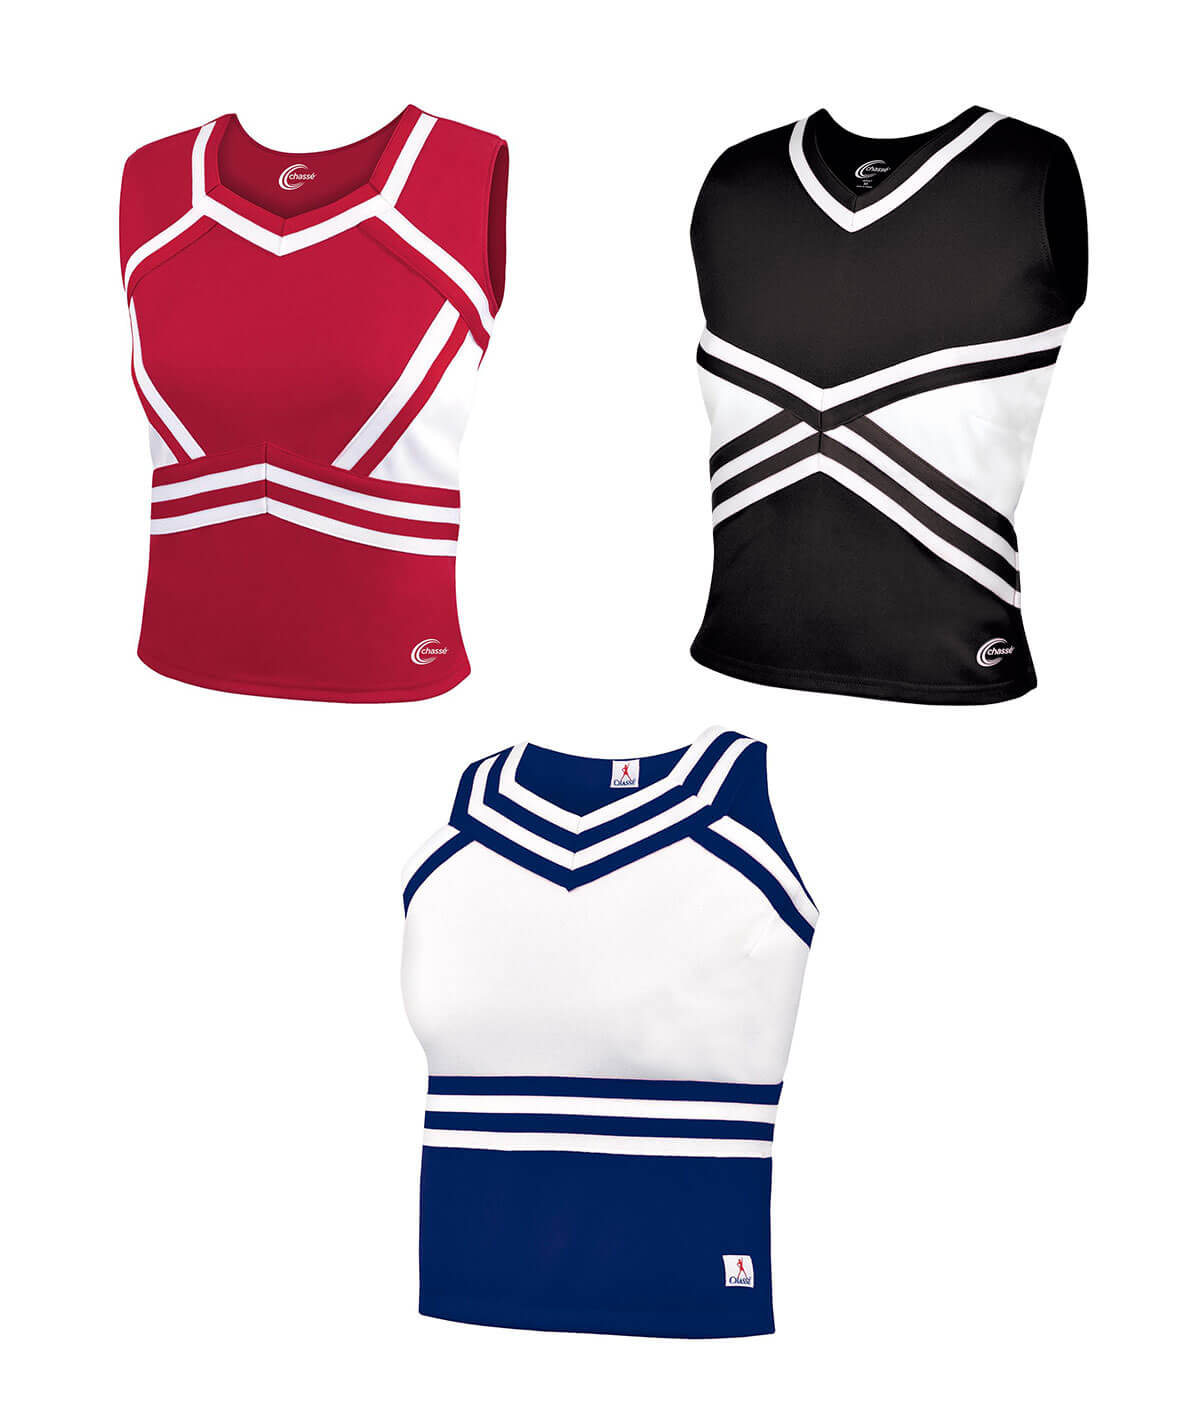 Chasse Classic Shell Top Options